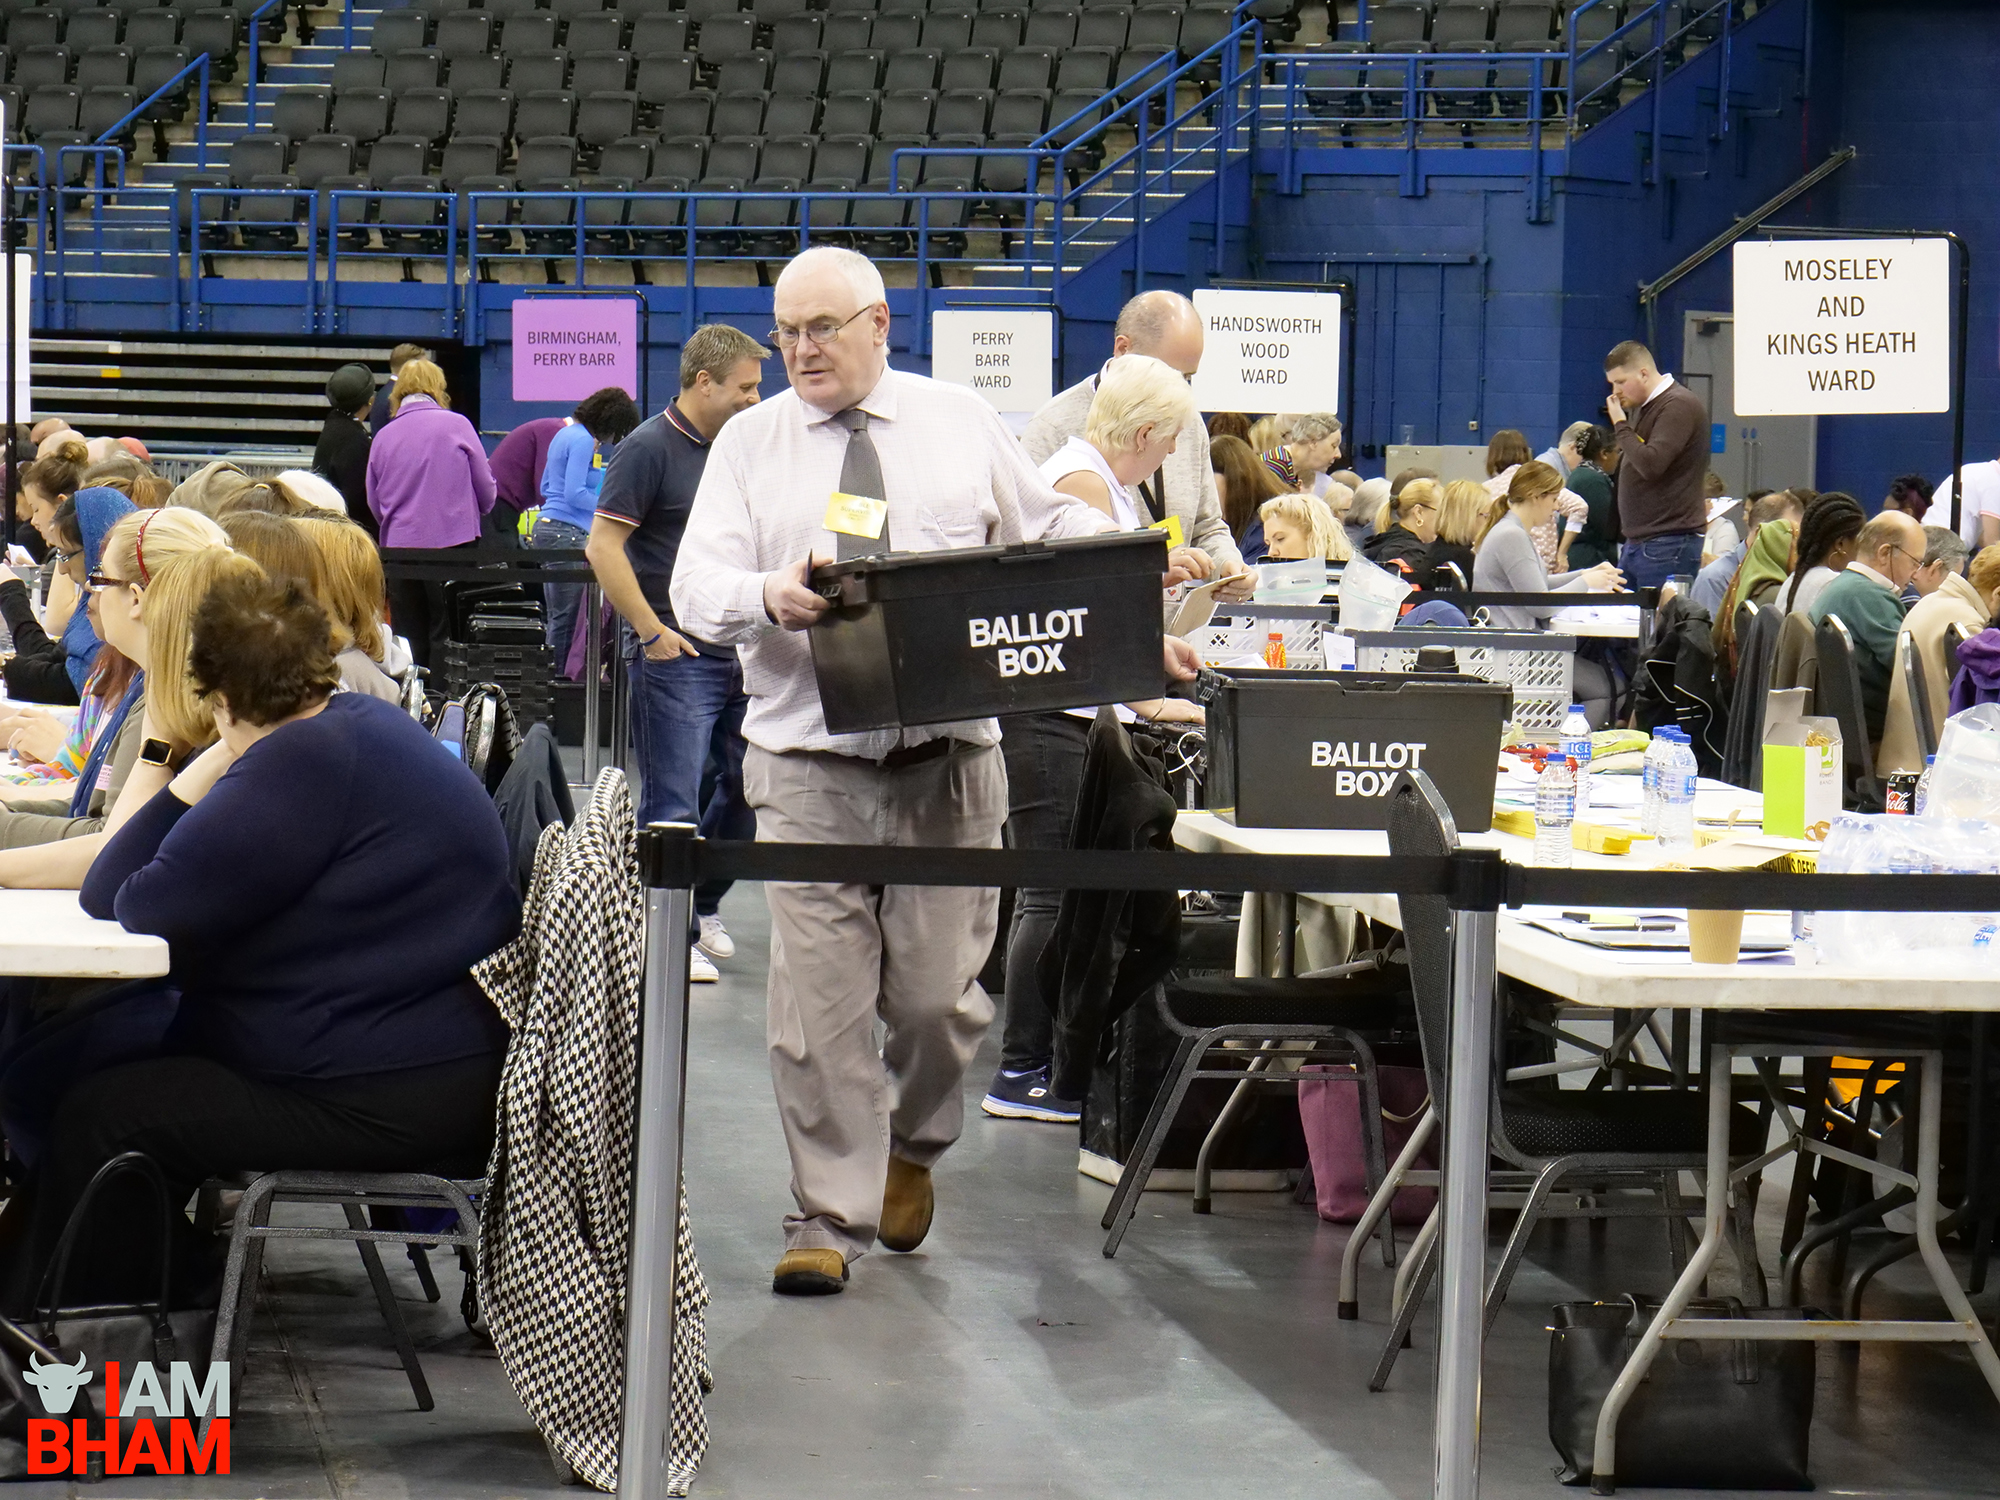 A ballot box is brought into the Birmingham Barclaycard Arena during the West Midlands Mayoral Election vote count